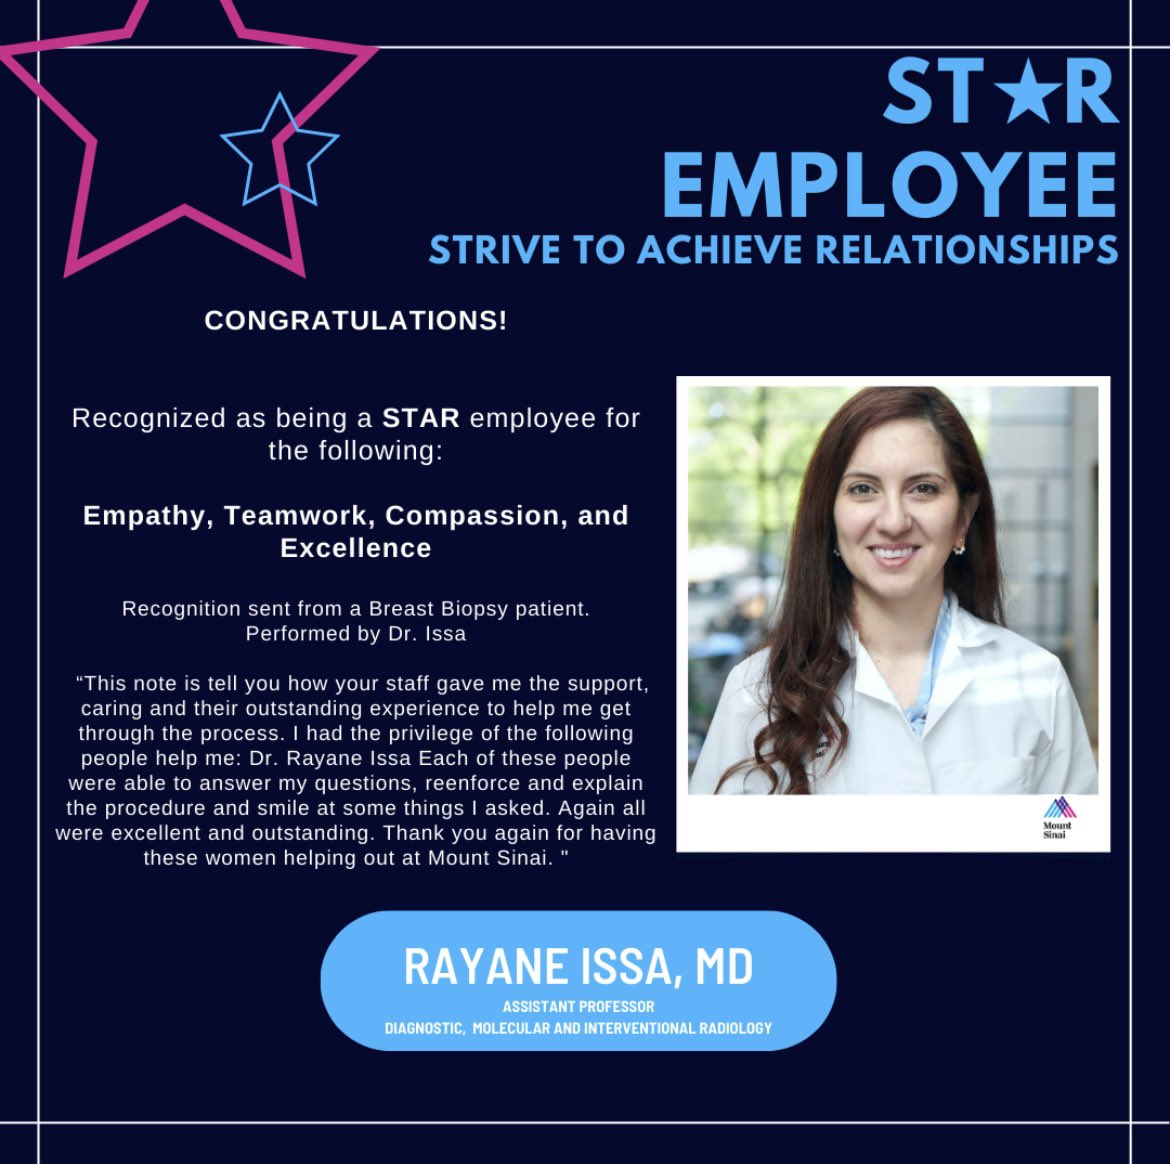 Congratulations to Dr. Issa Rayane for receiving recognition through the Star nomination for her dedication to upholding the values and service behaviors of the @IcahnMountSinai @MSHSBreast @MountSinaiDMIR @RofskyMD #staremployee